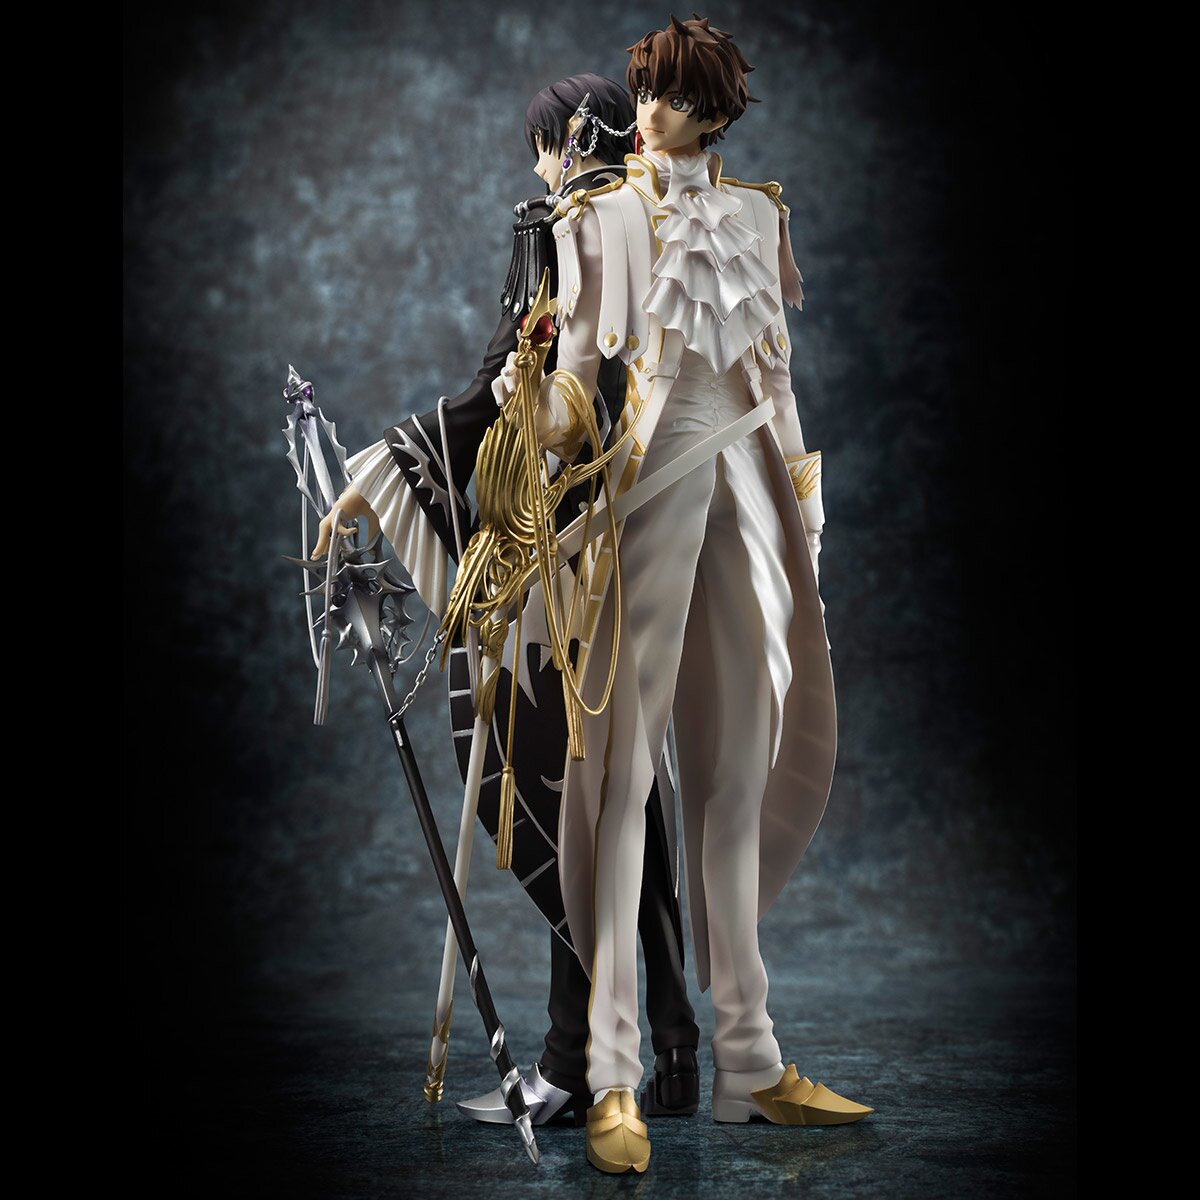 G.E.M. Series: Code Geass Lelouch of the Rebellion R2 - CLAMP